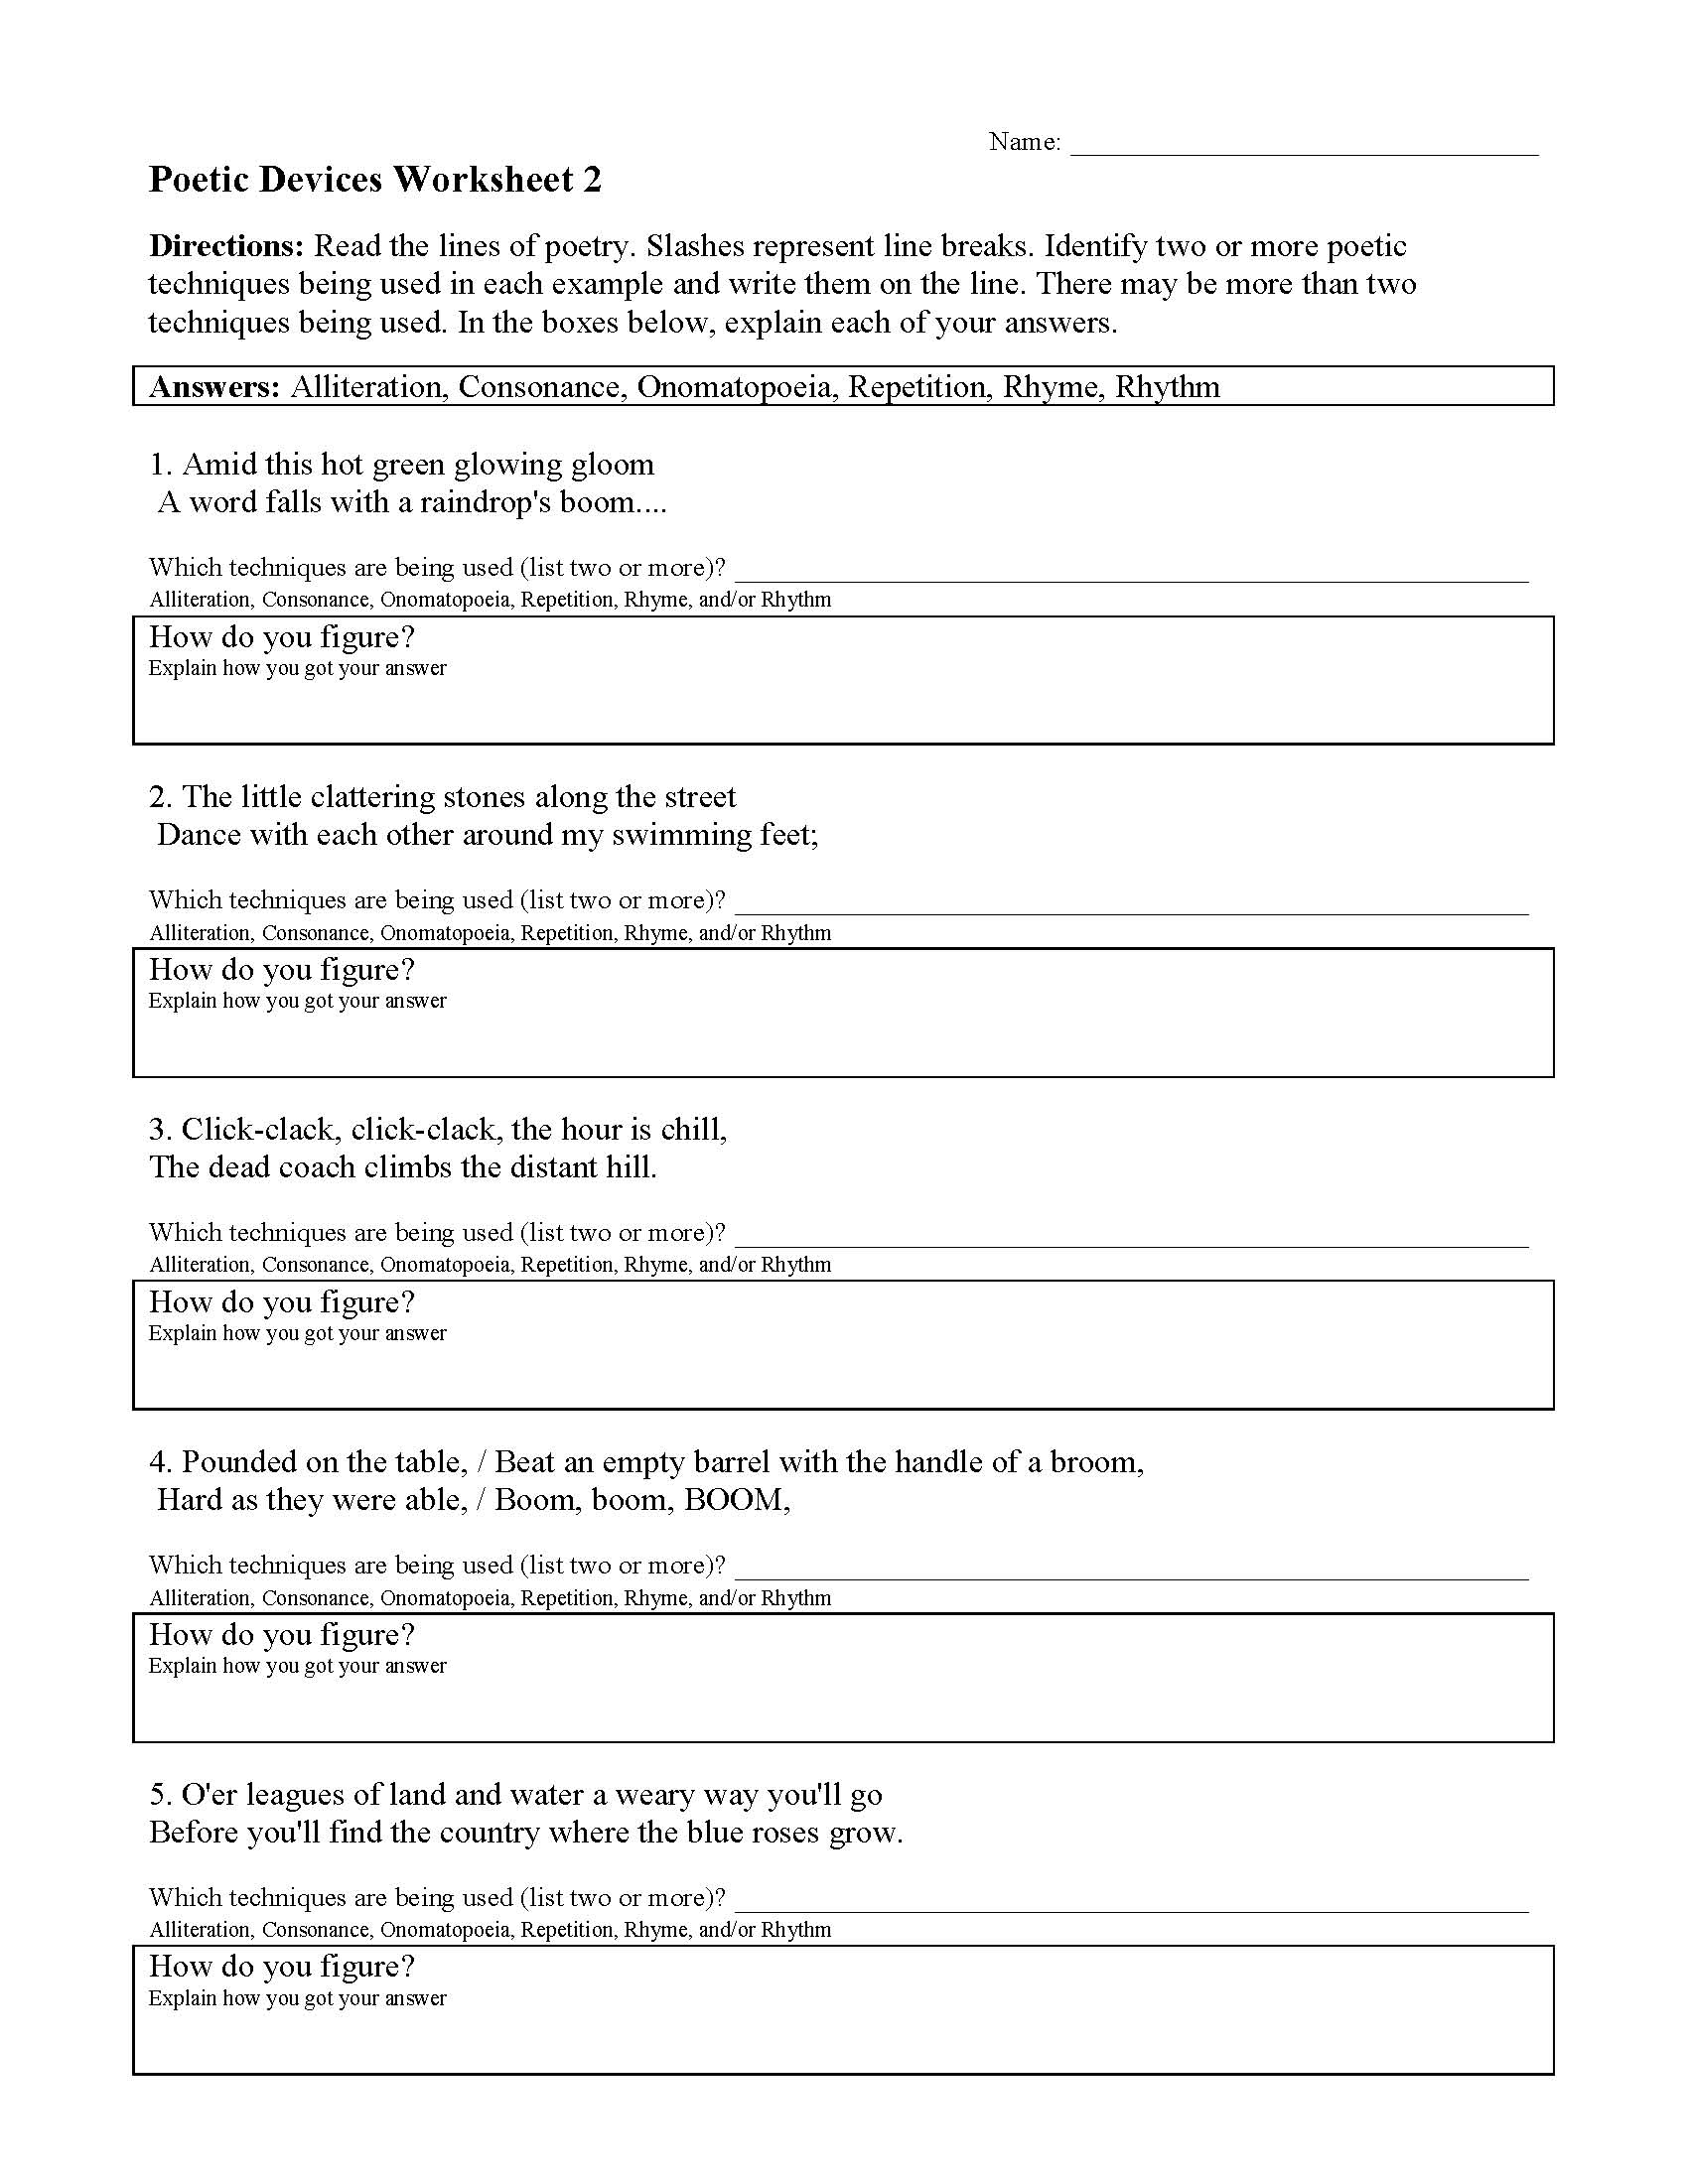 sound-devices-in-poetry-worksheet